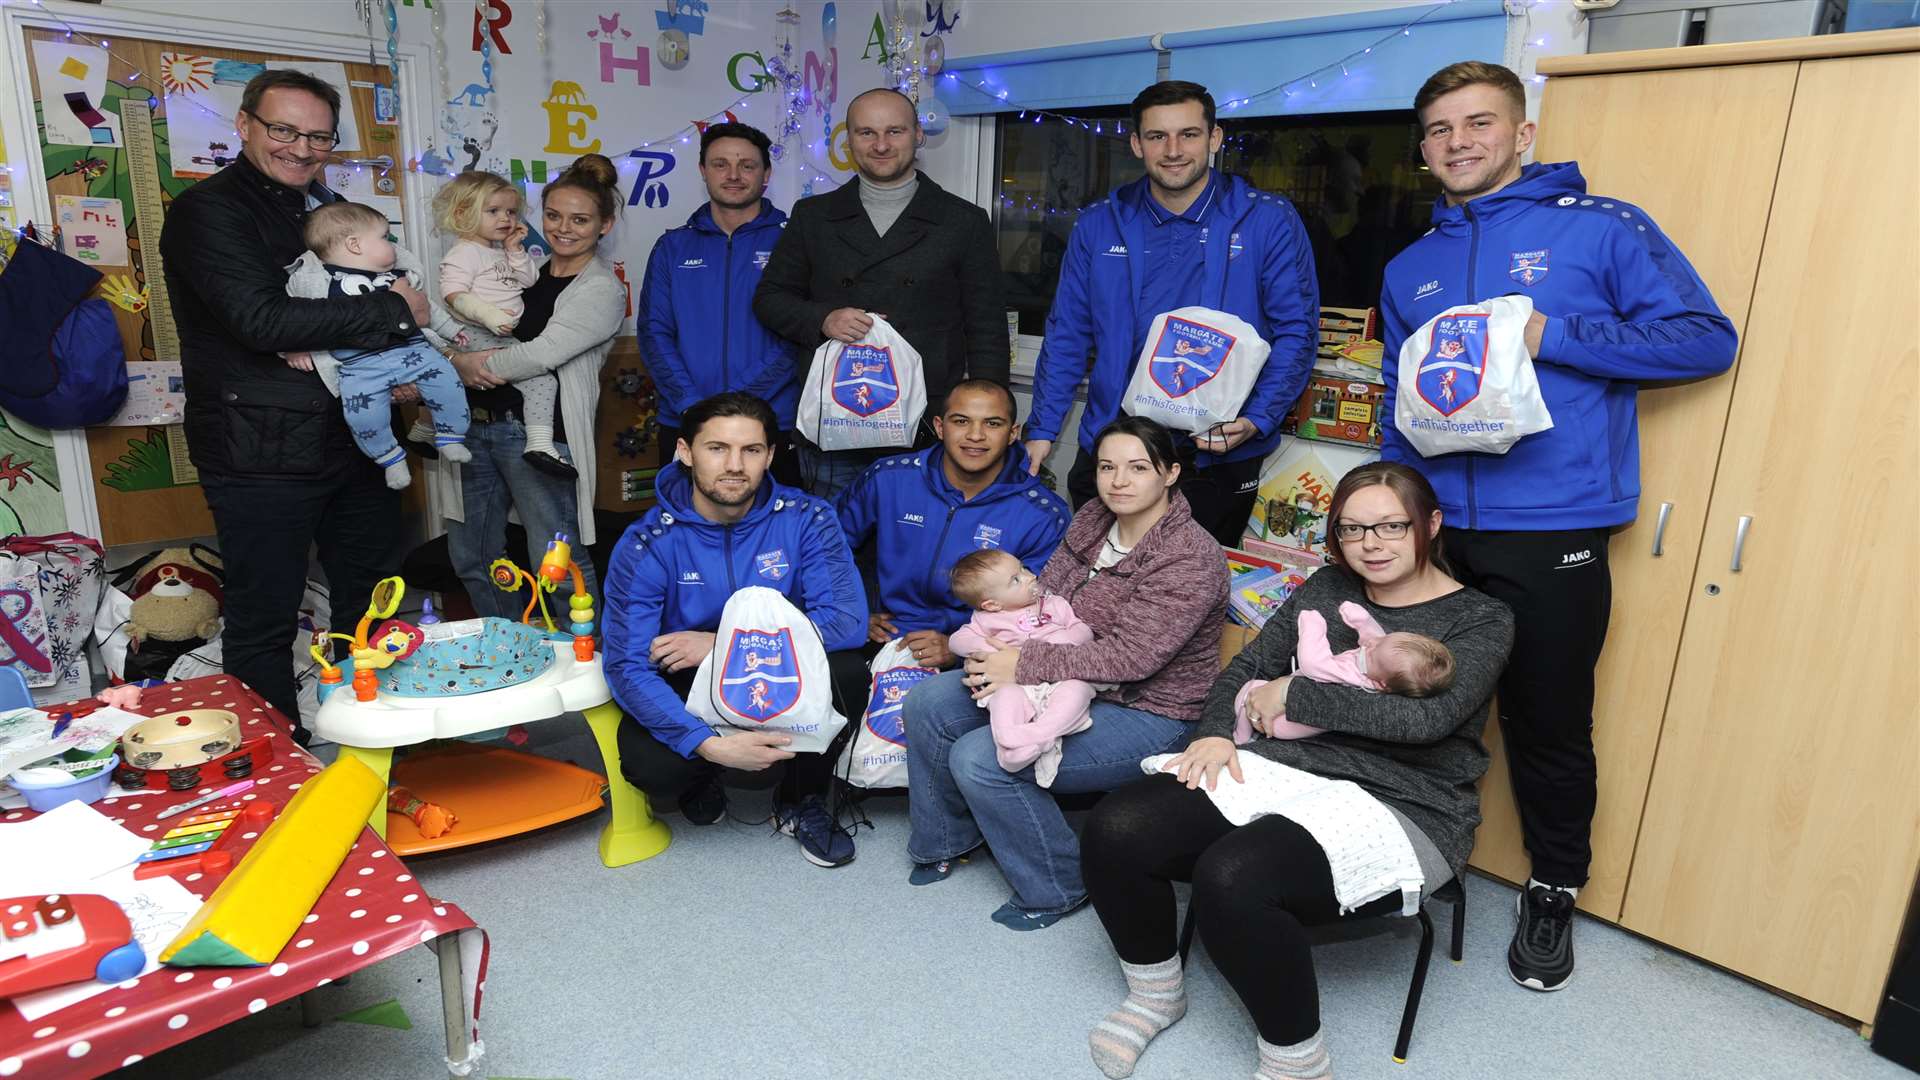 Margate manager Steve Watt, chairman Alistair Bayliss and several of the Gate squad visited young patients of the Rainbow Ward